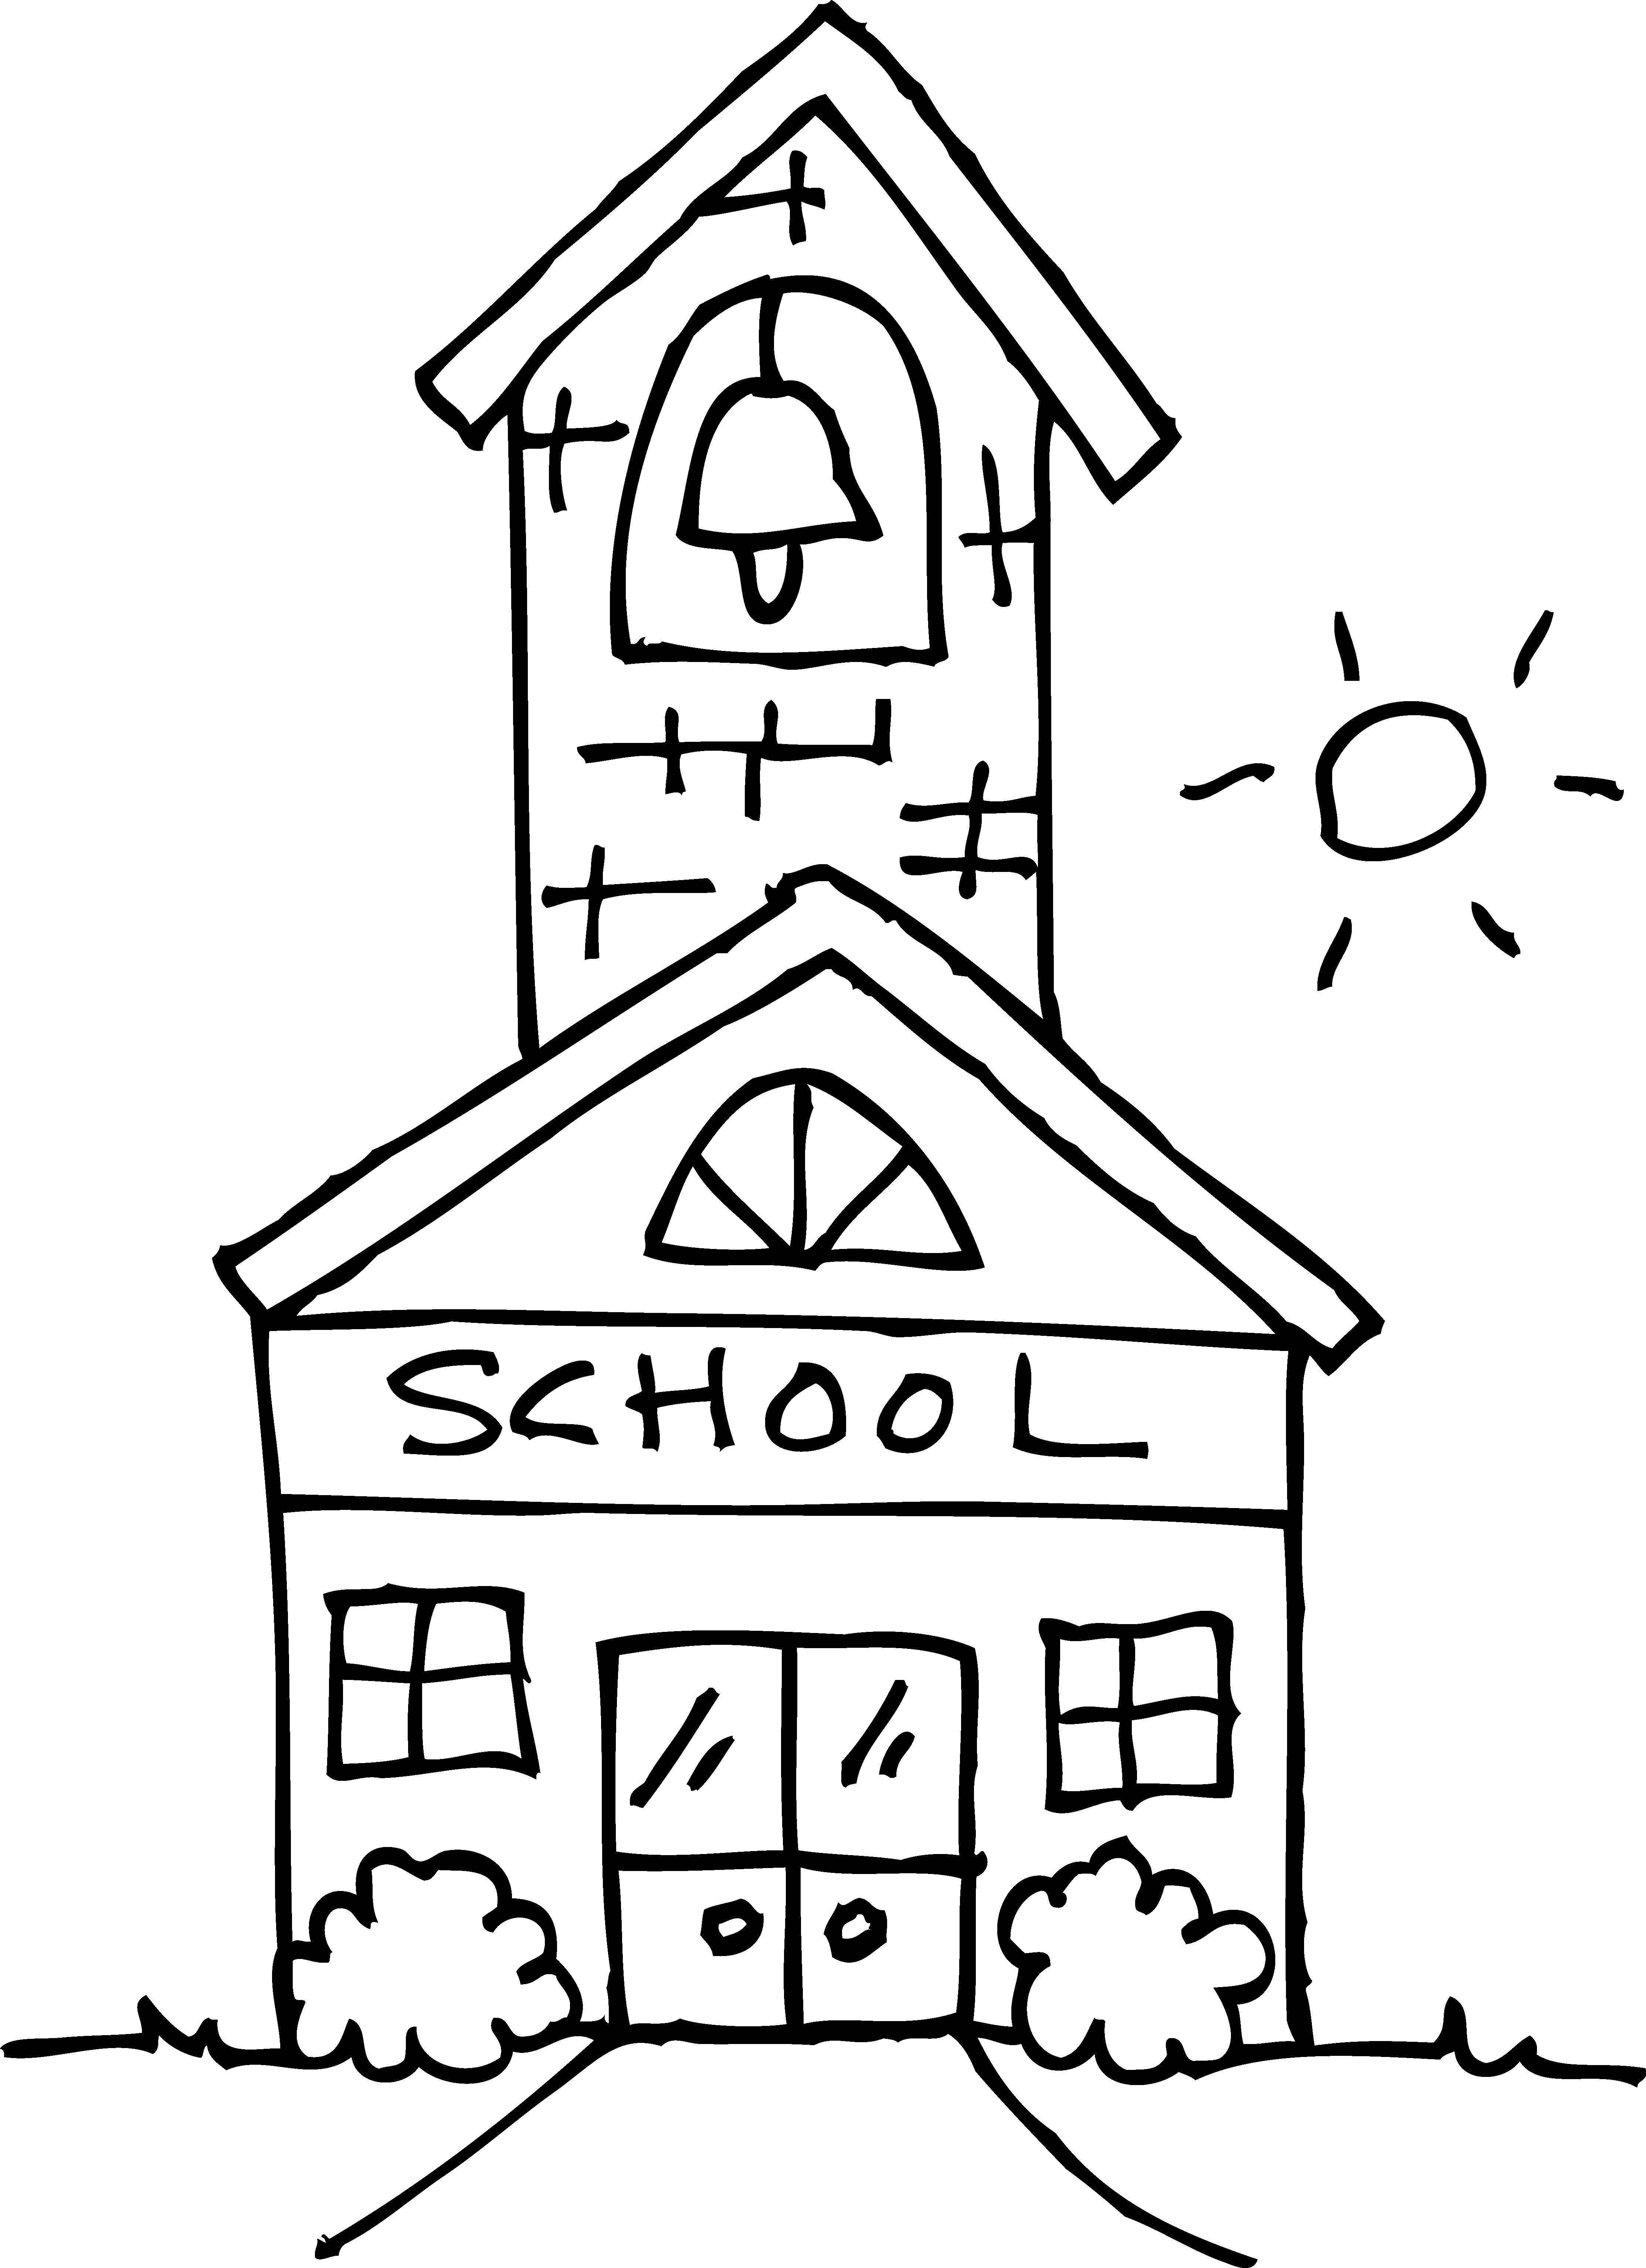 School House - Coloring Pages for Kids and for Adults